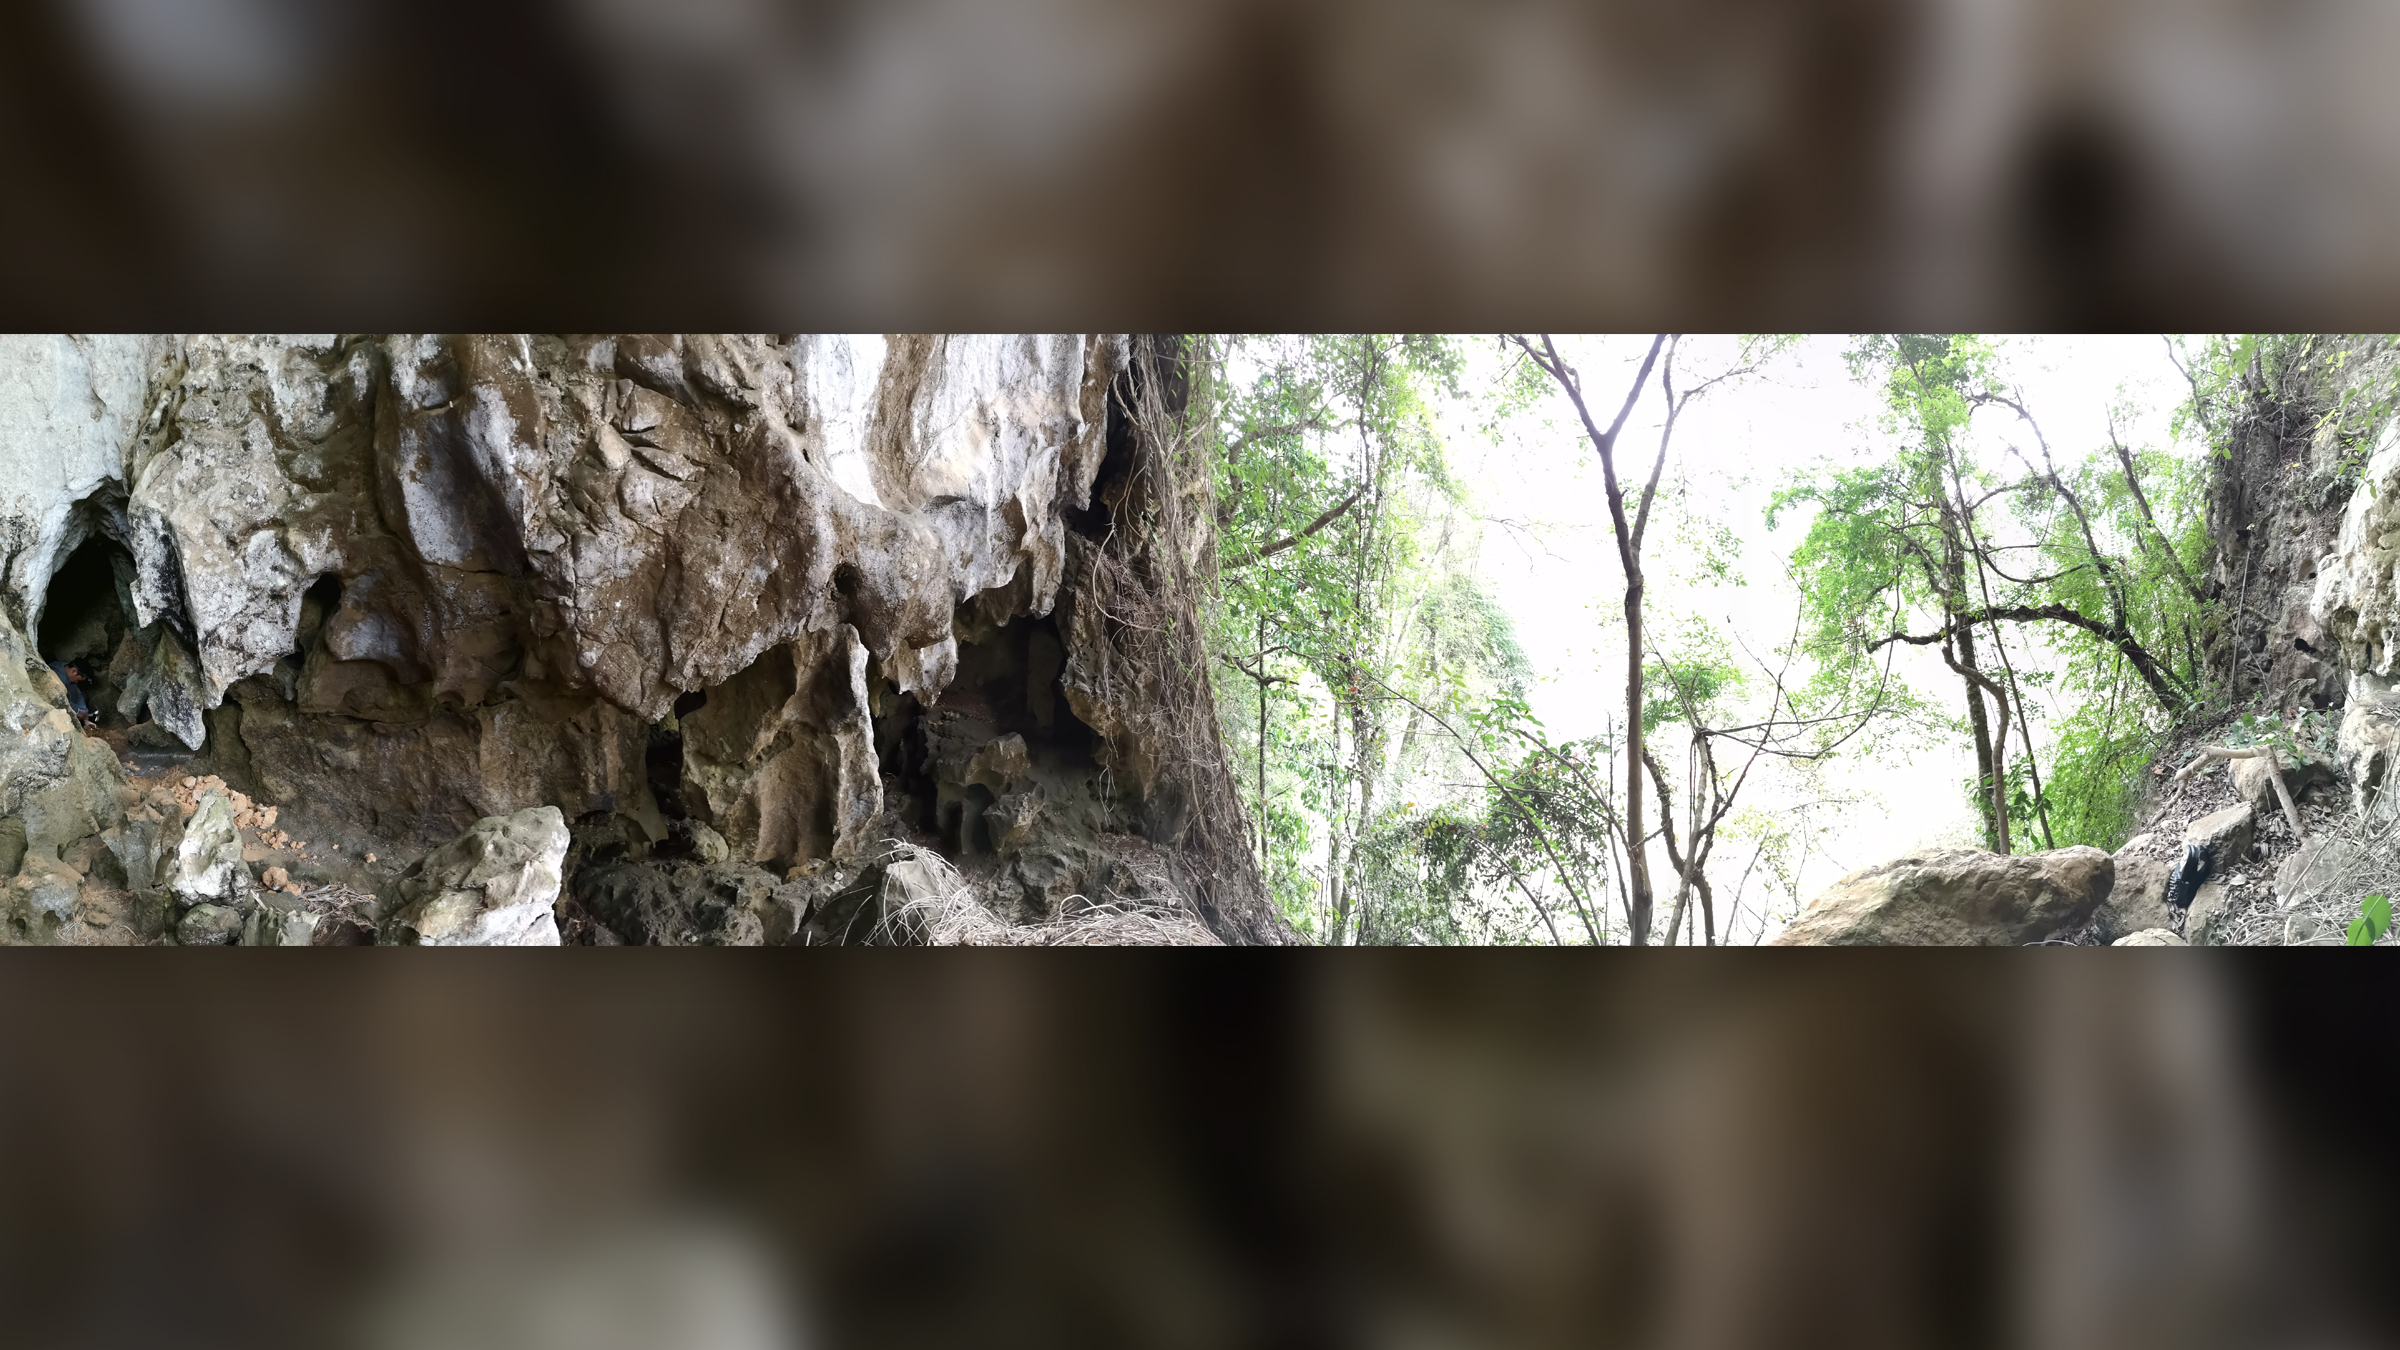 This panorama shows Ngu Hao 2 (Cobra Cave) in northern Laos.  The entrance to the cave is on the left.